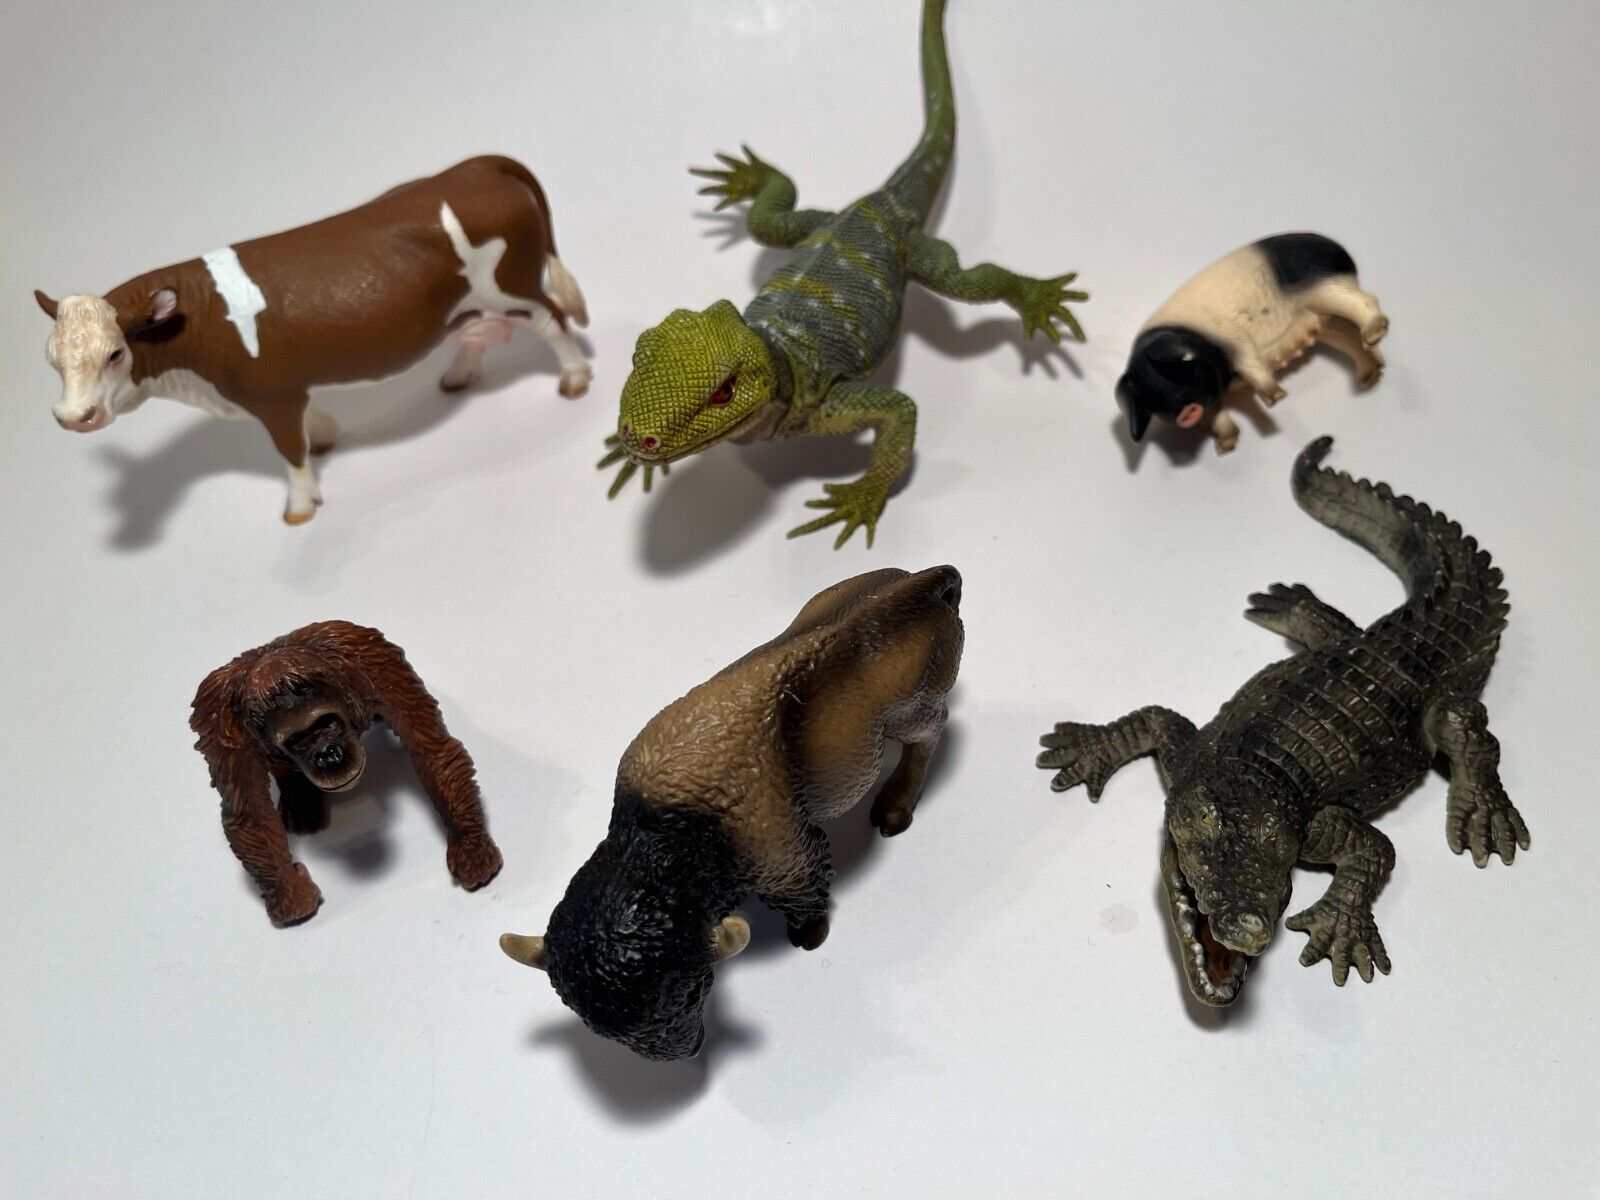 Schleich Germany, TOYSMITH High Quality Realistic Artwork Animals Collection Schleich Germany, TOYSMITH Schleich Germany - фотография #7